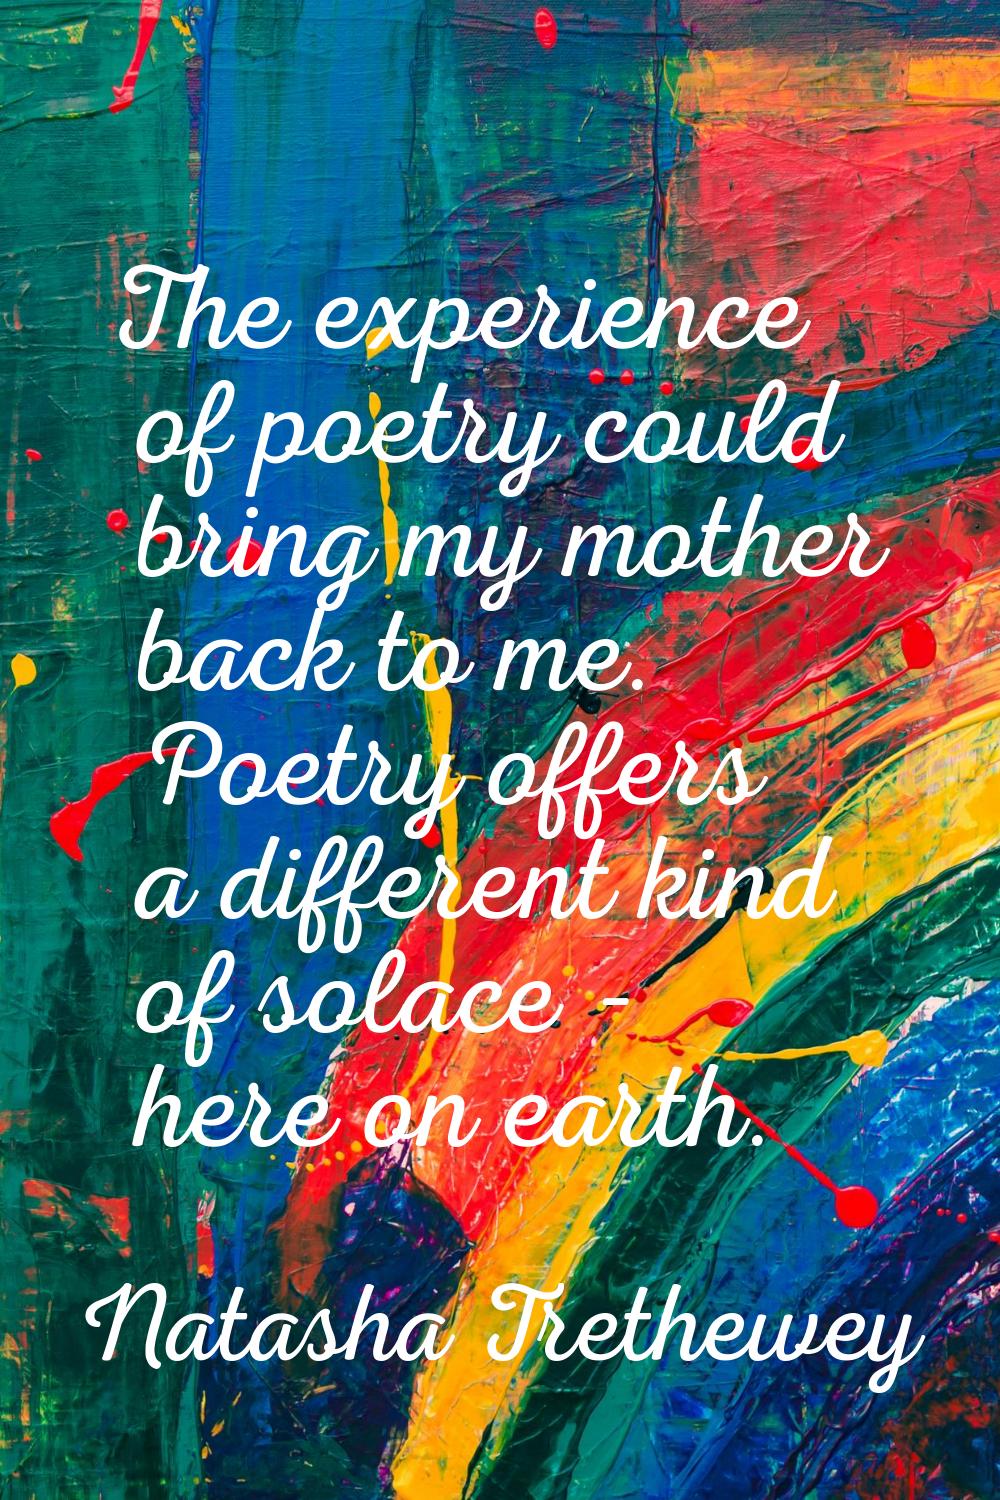 The experience of poetry could bring my mother back to me. Poetry offers a different kind of solace